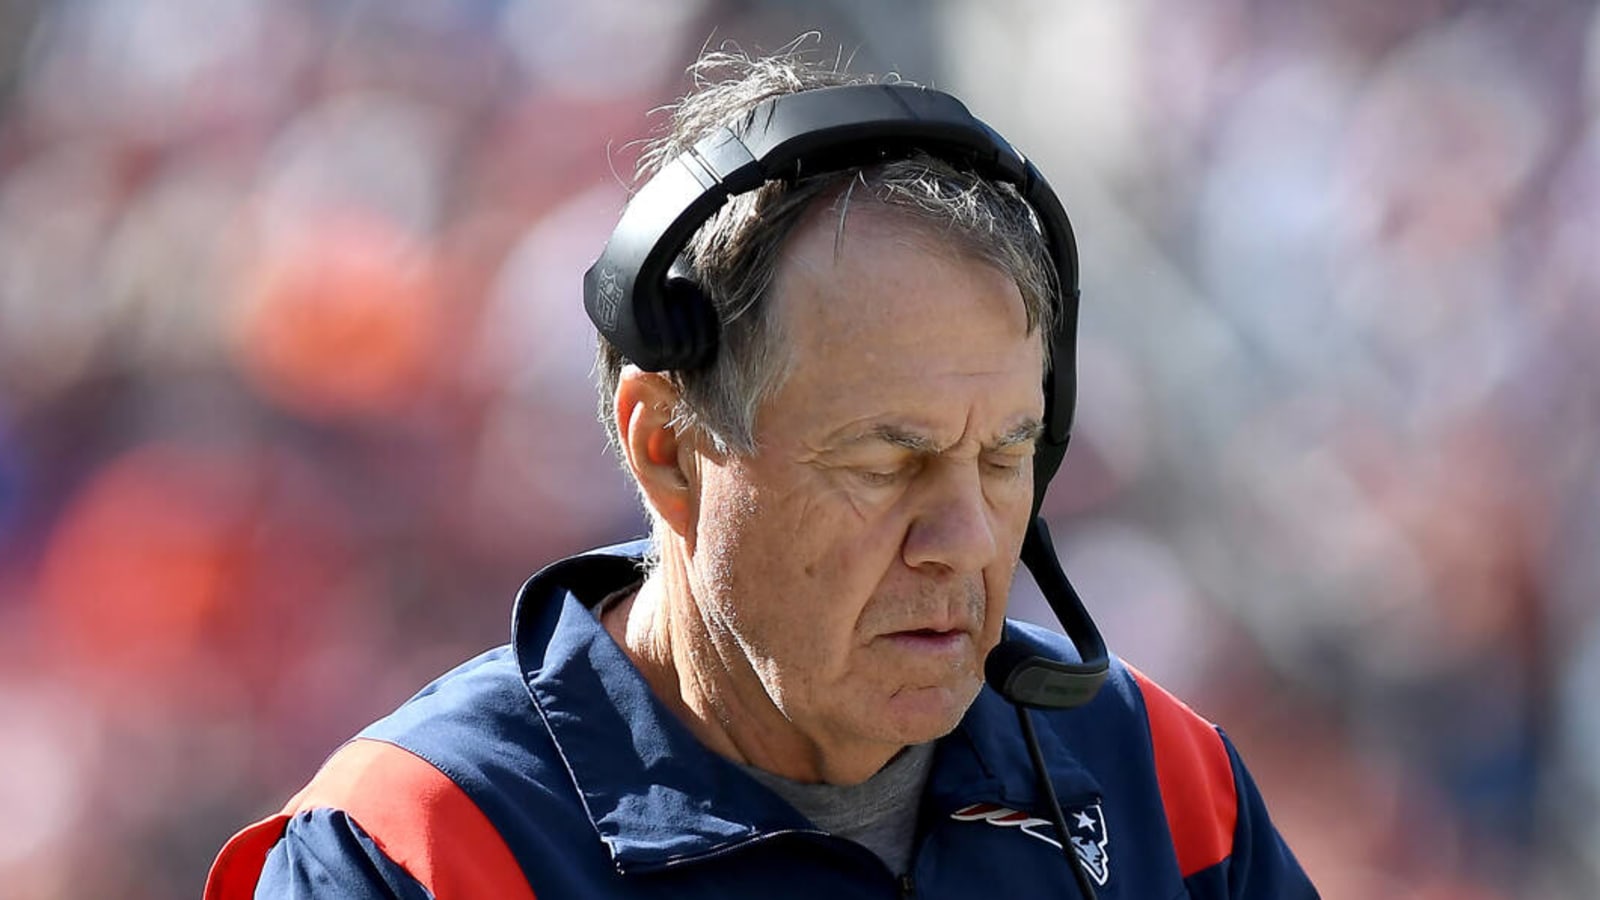 Watch: Patriots' Belichick has awkward encounter with over-anxious rookie